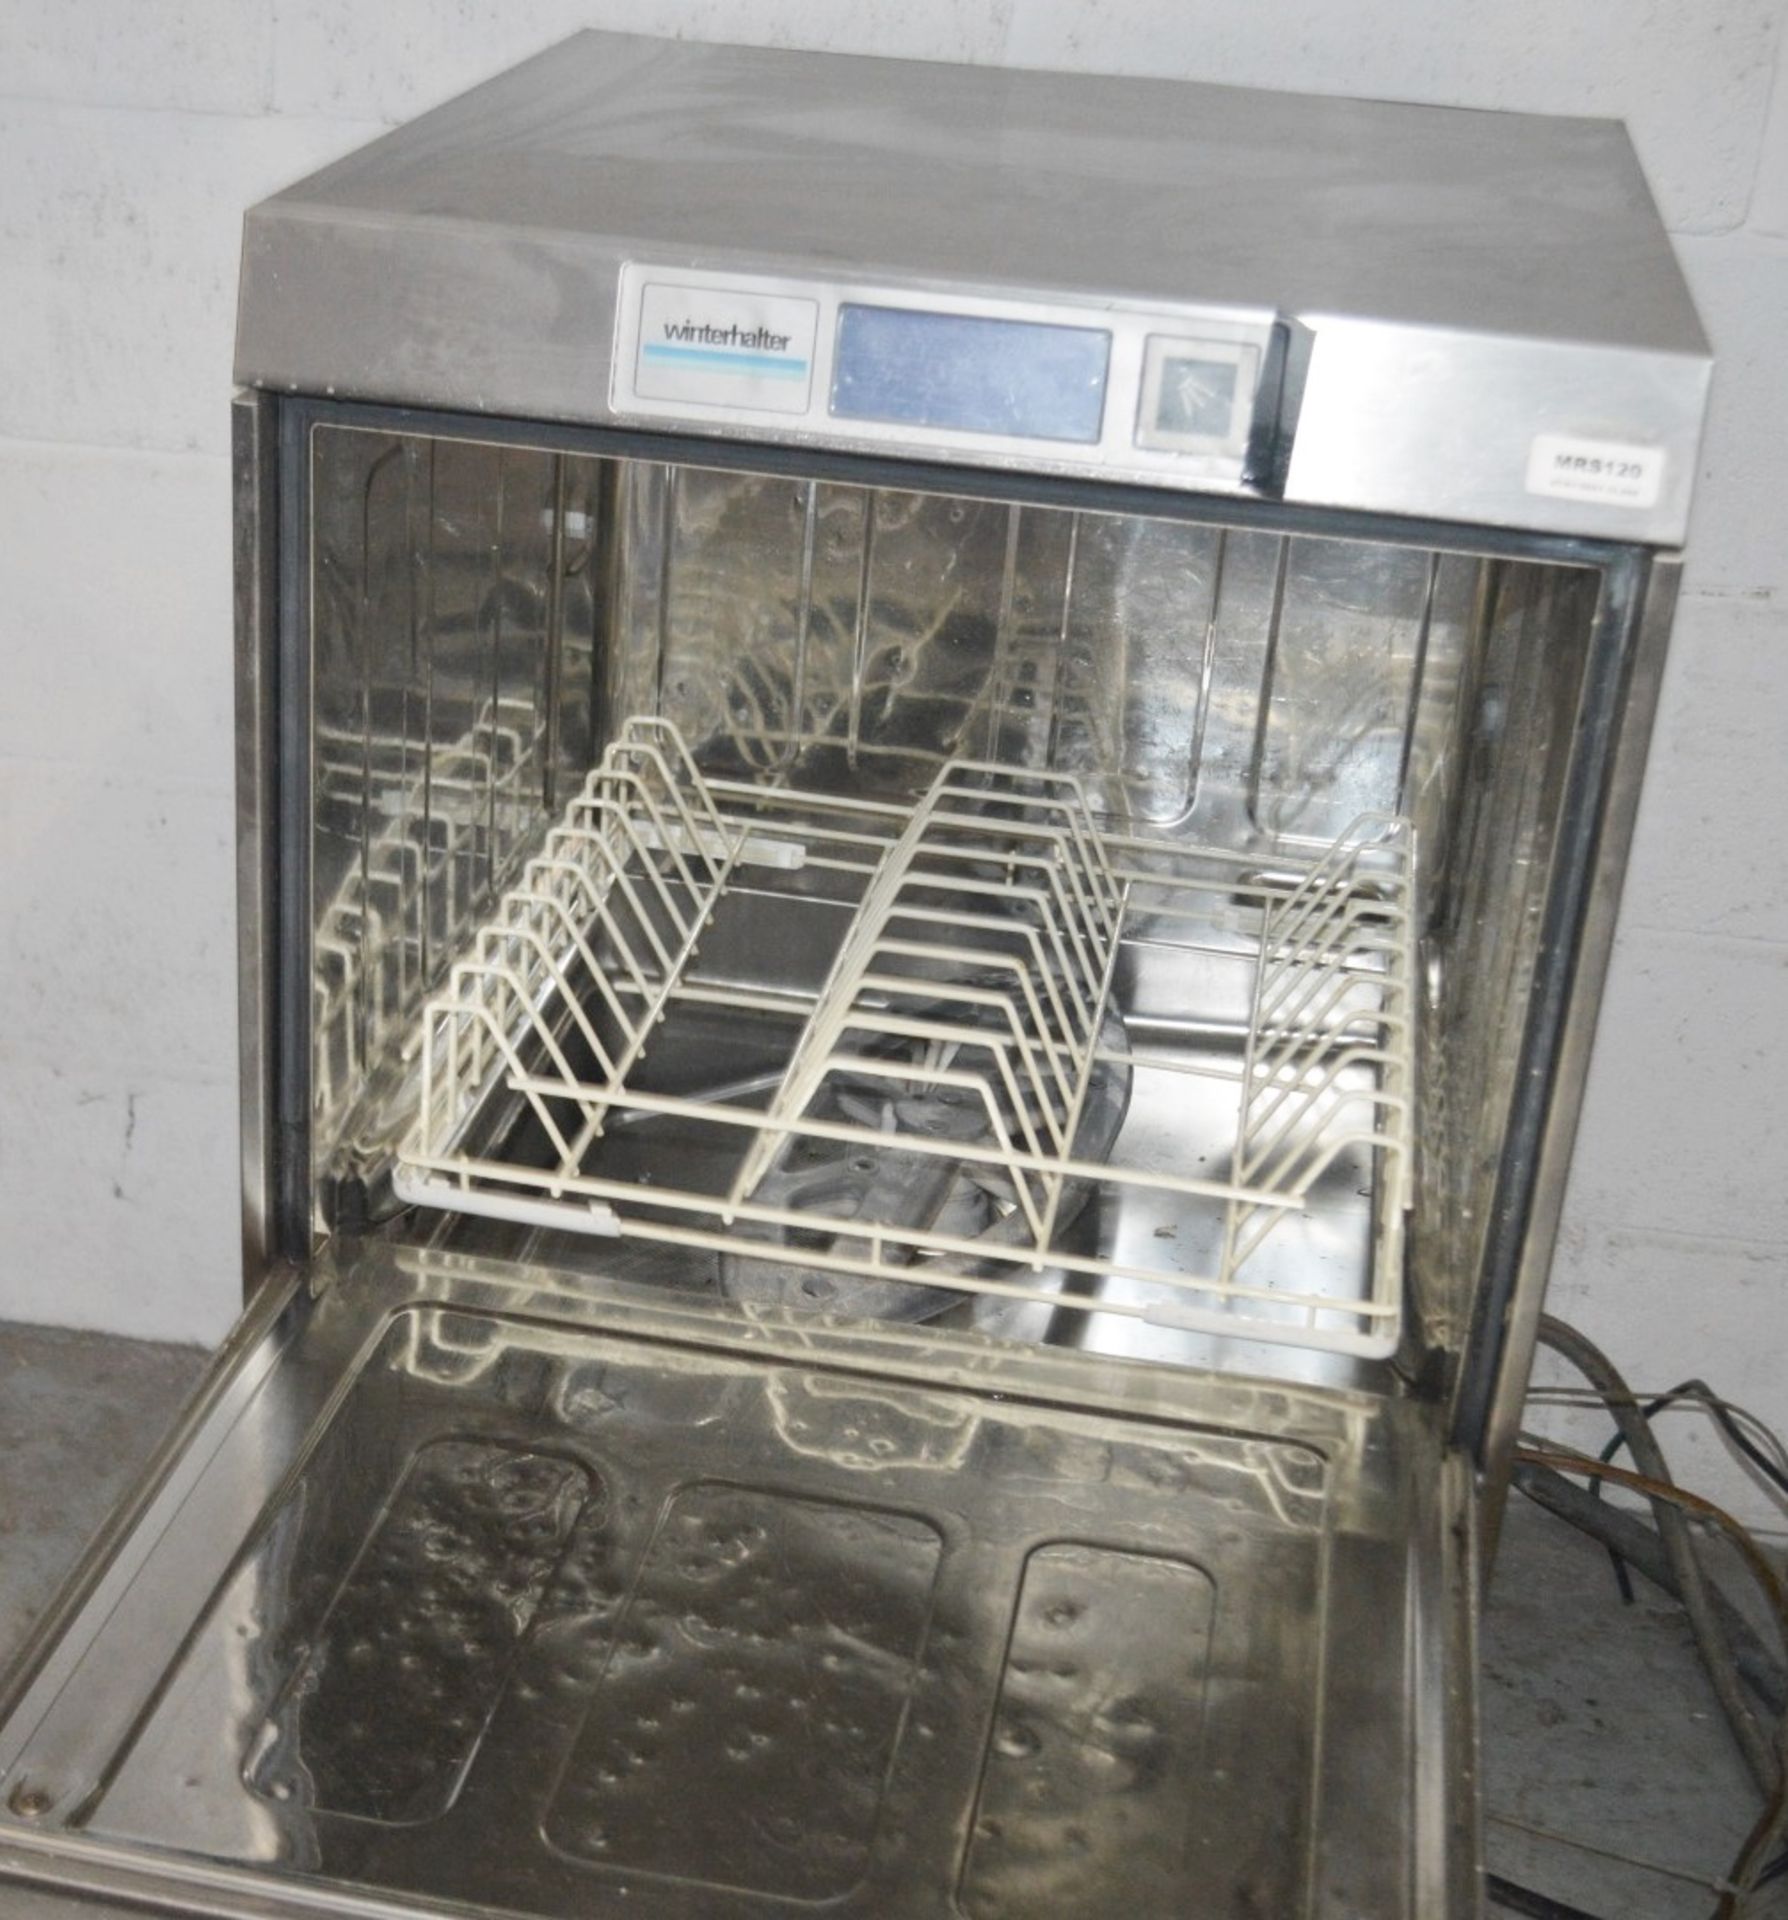 1 x Winterhalter UC-L Undercounter Commercial Kitchen Dishwasher - Dimensions: H102 x W60 x - Image 4 of 7